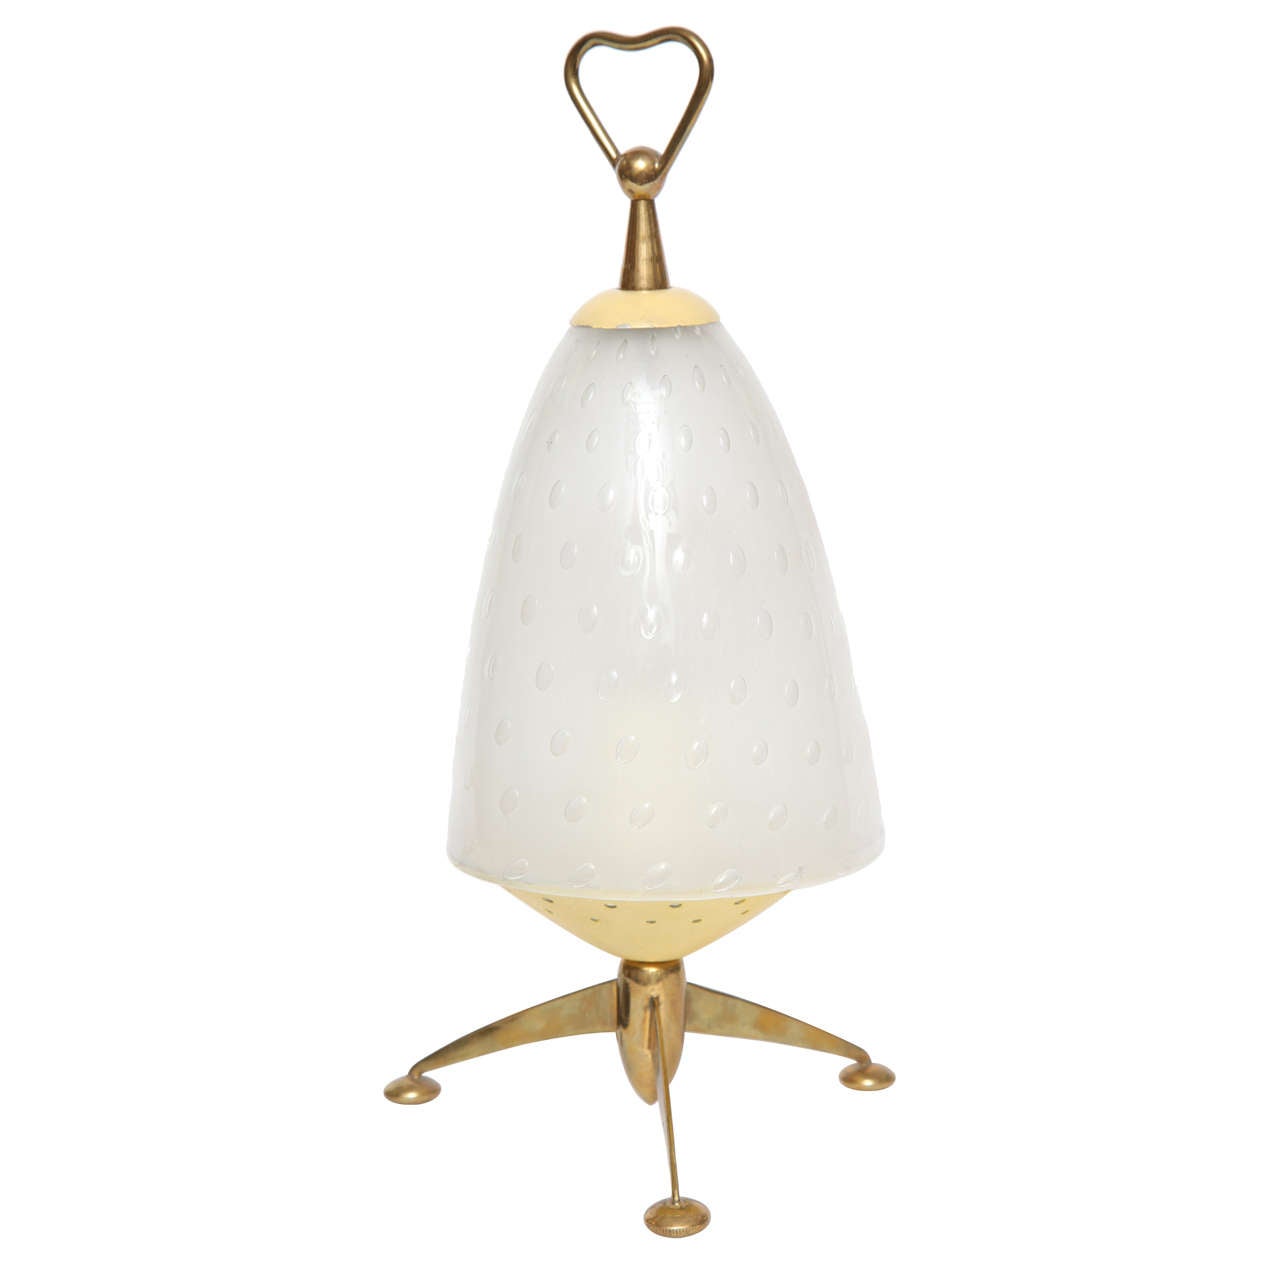  Table Lamp Mid Century Modern Sculptural glass and brass Italy 1950's For Sale